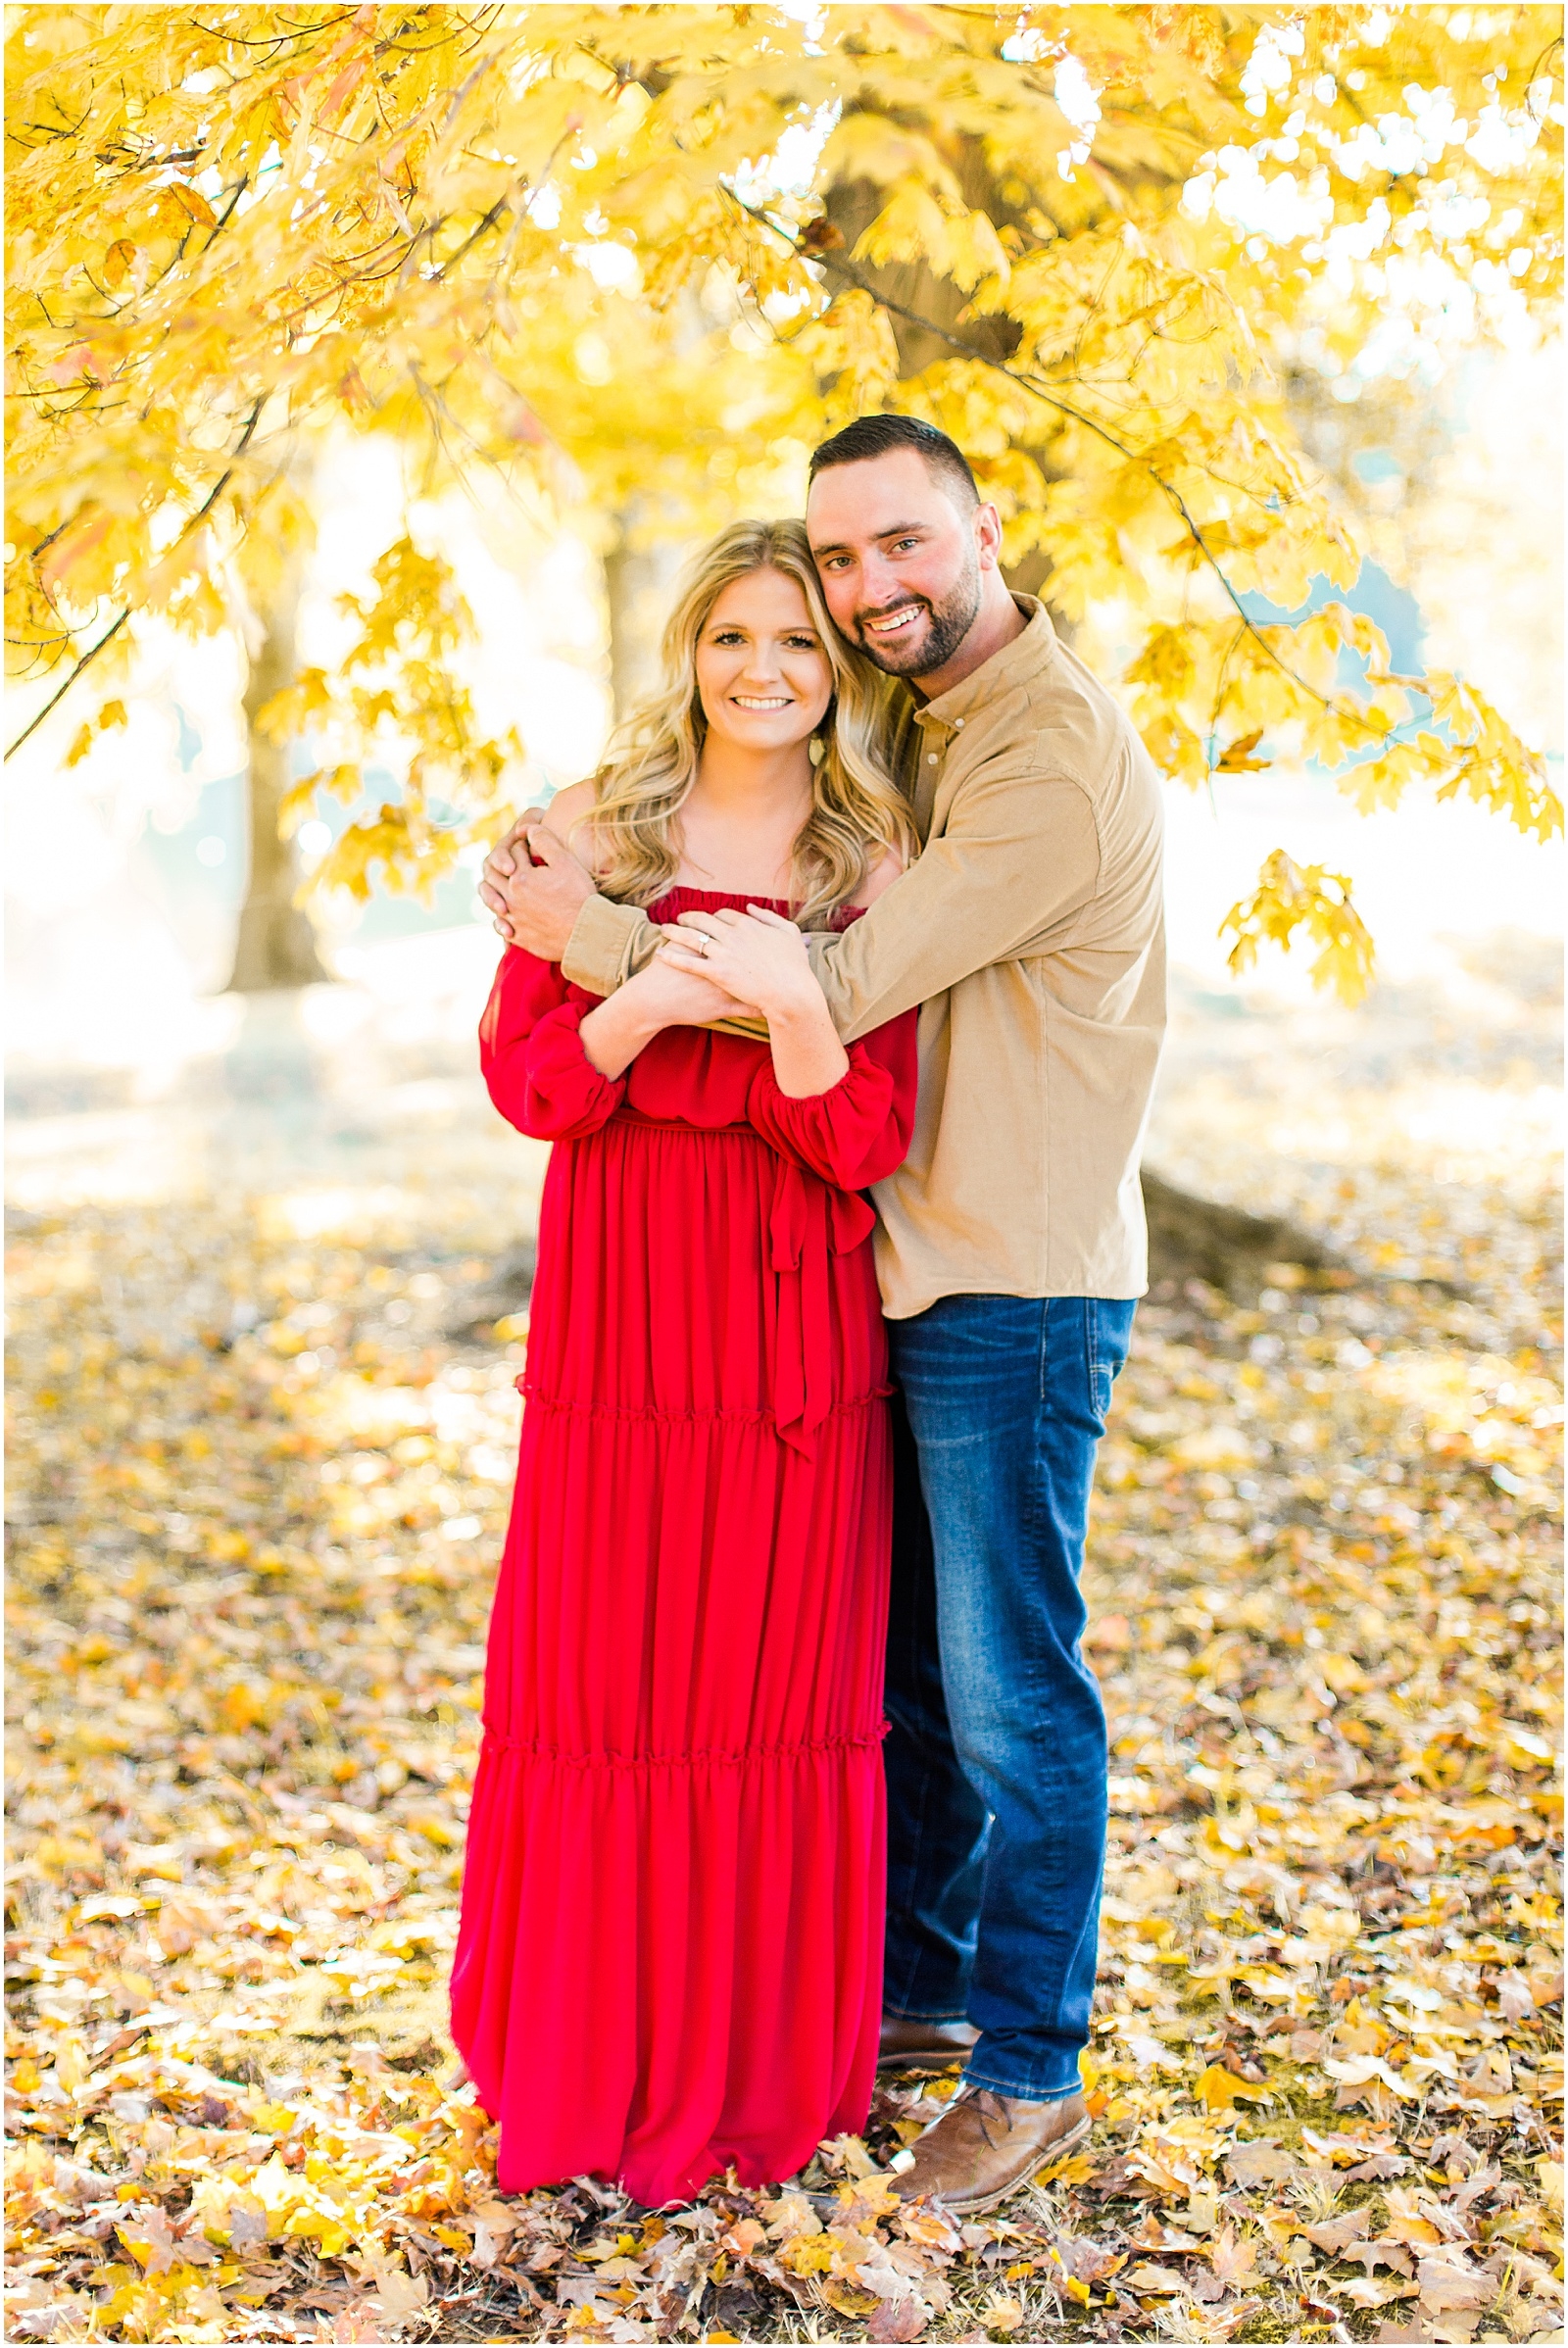 A Southern Indiana Engagement Session | Charleston and Erin | Bret and Brandie Photography027.jpg